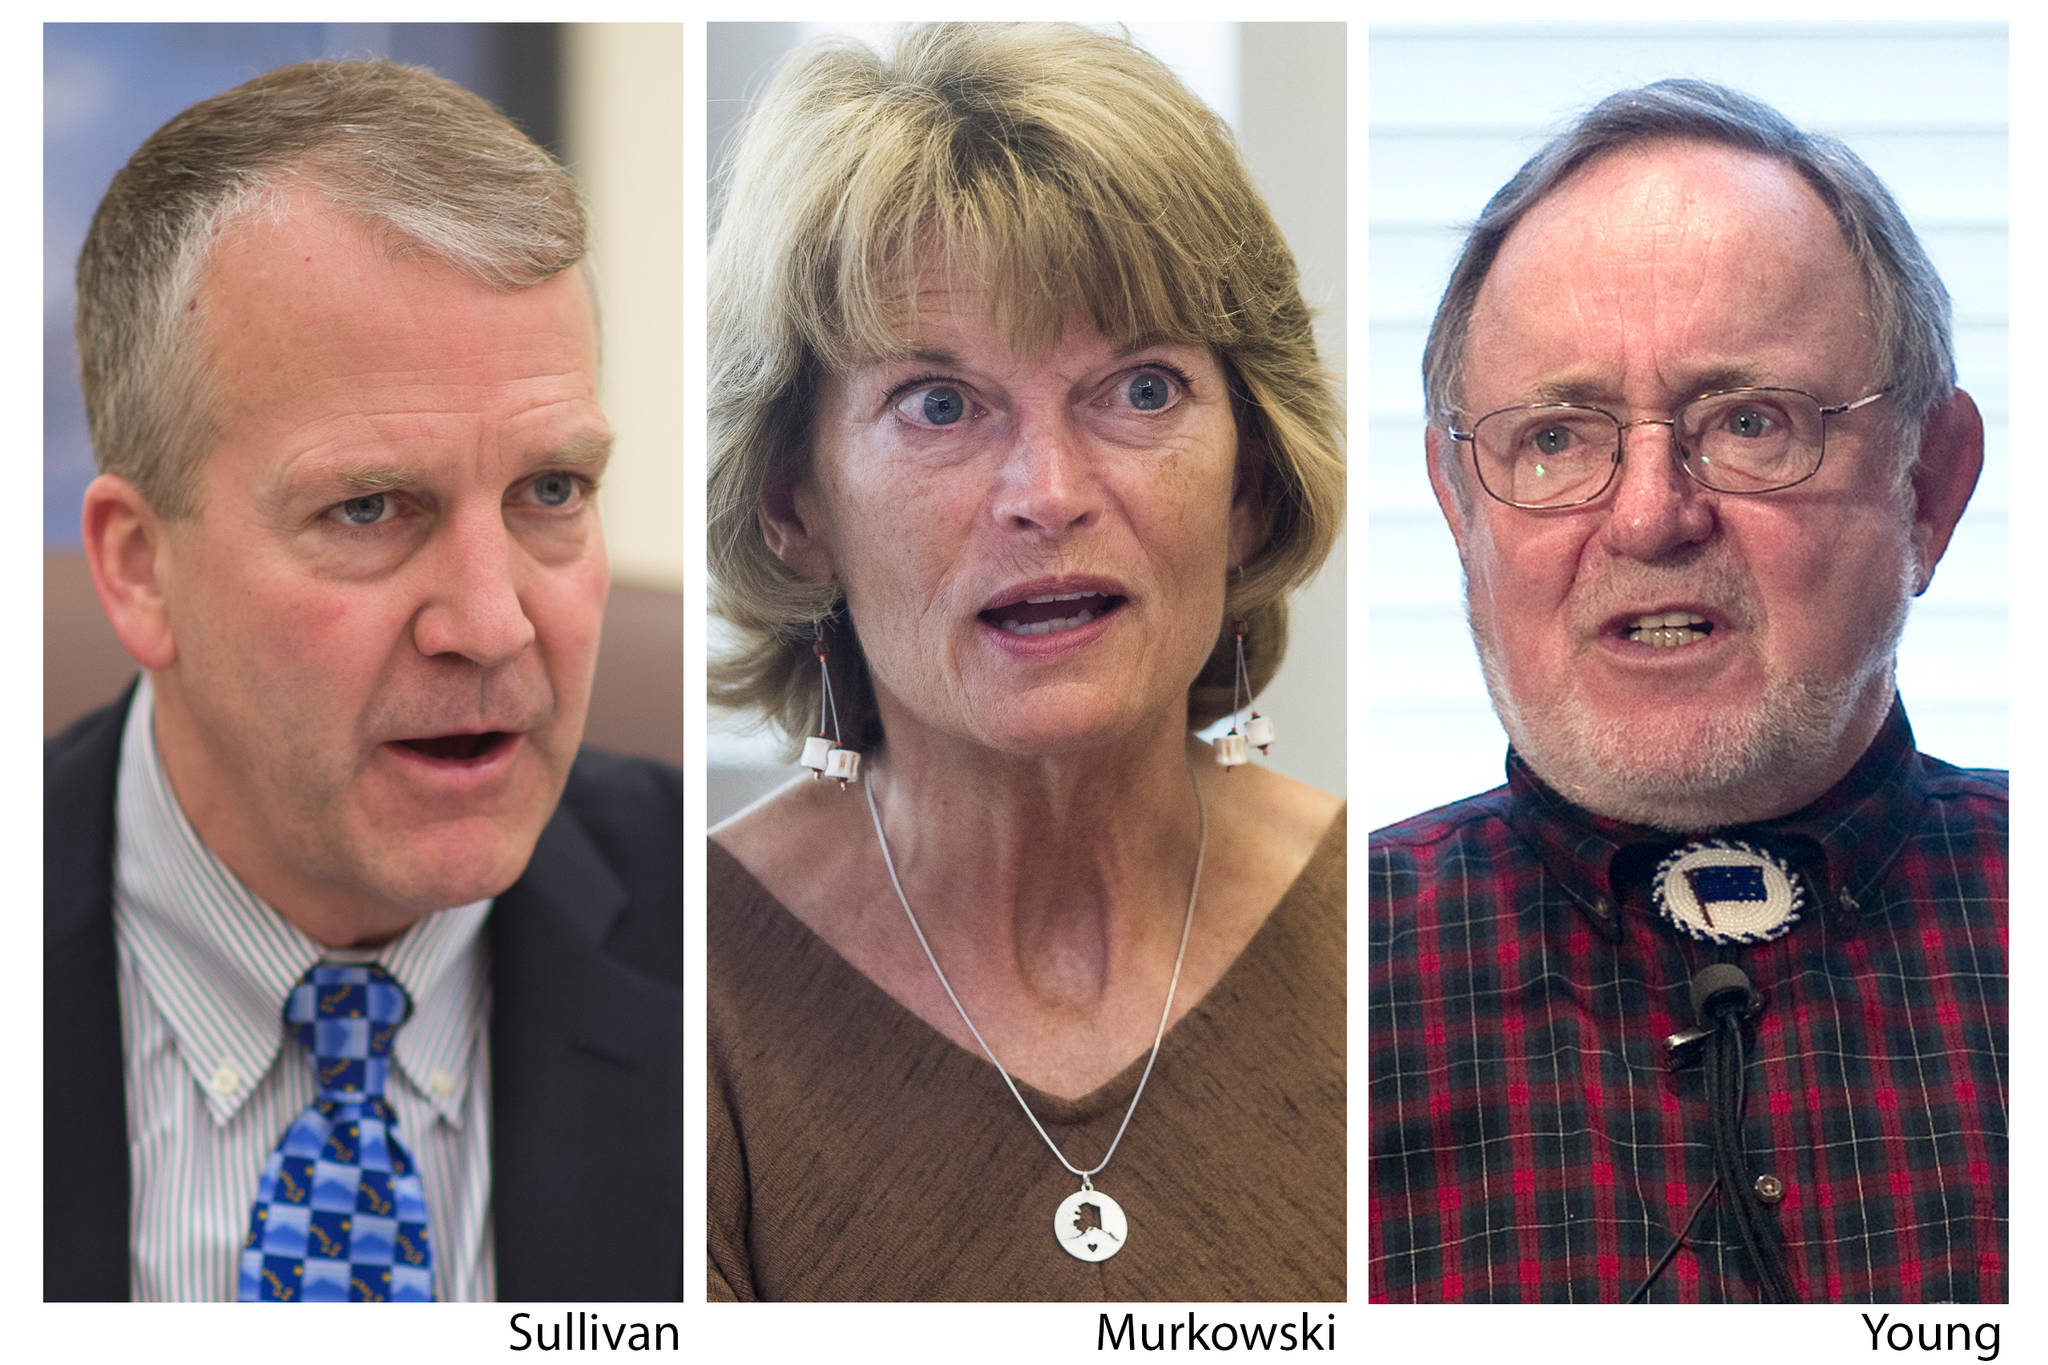 Alaska’s congressional delegation, from left to right: Sens. Dan Sullivan, Lisa Murkowski and Rep. Don Young, all Republicans.